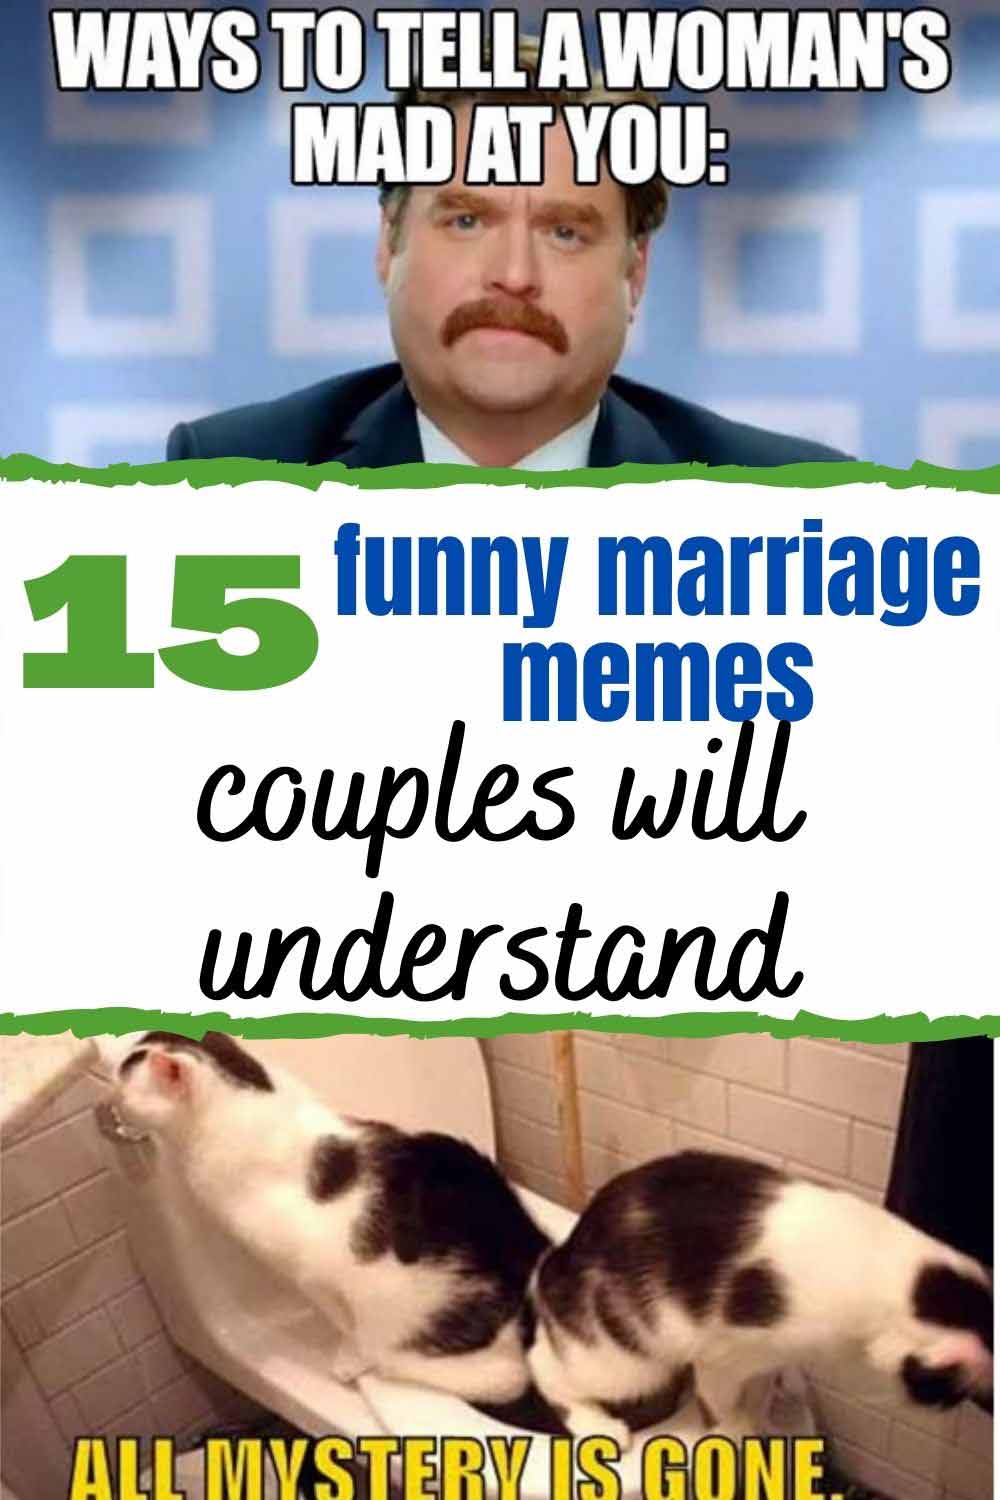 Find humor in married life with these funny marriage memes 